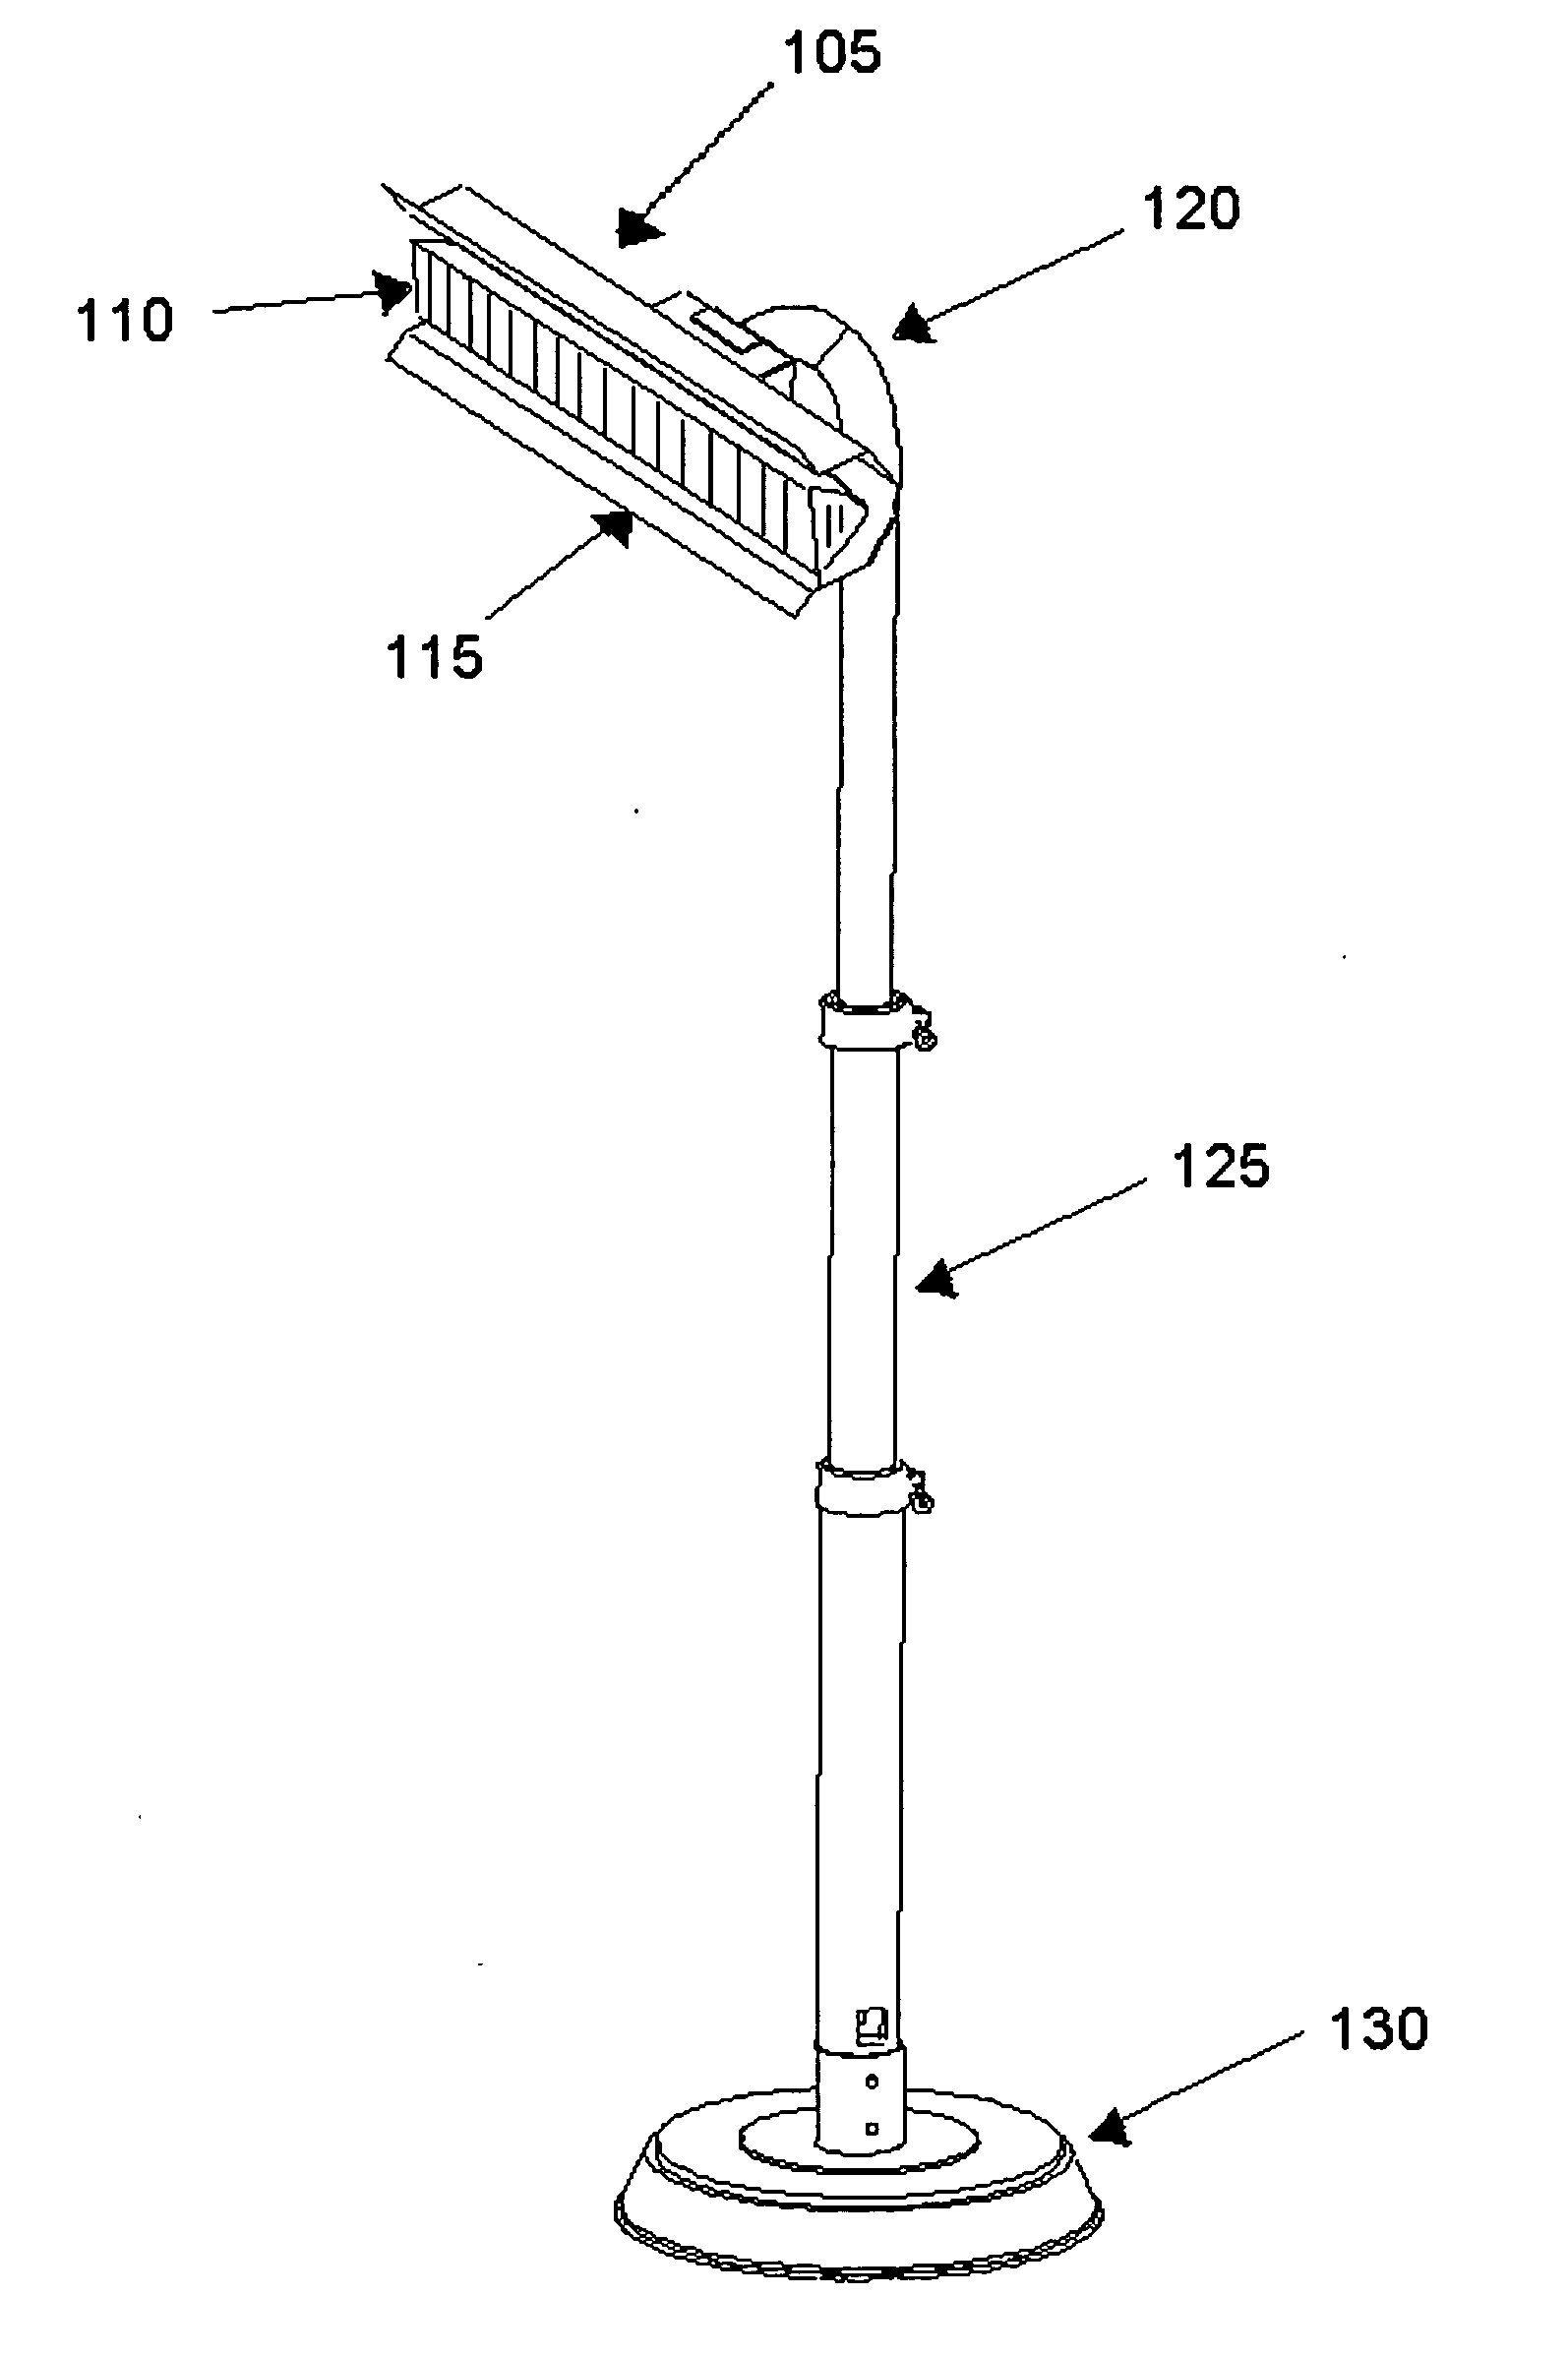 System of short-wave-infrared heater support assembly